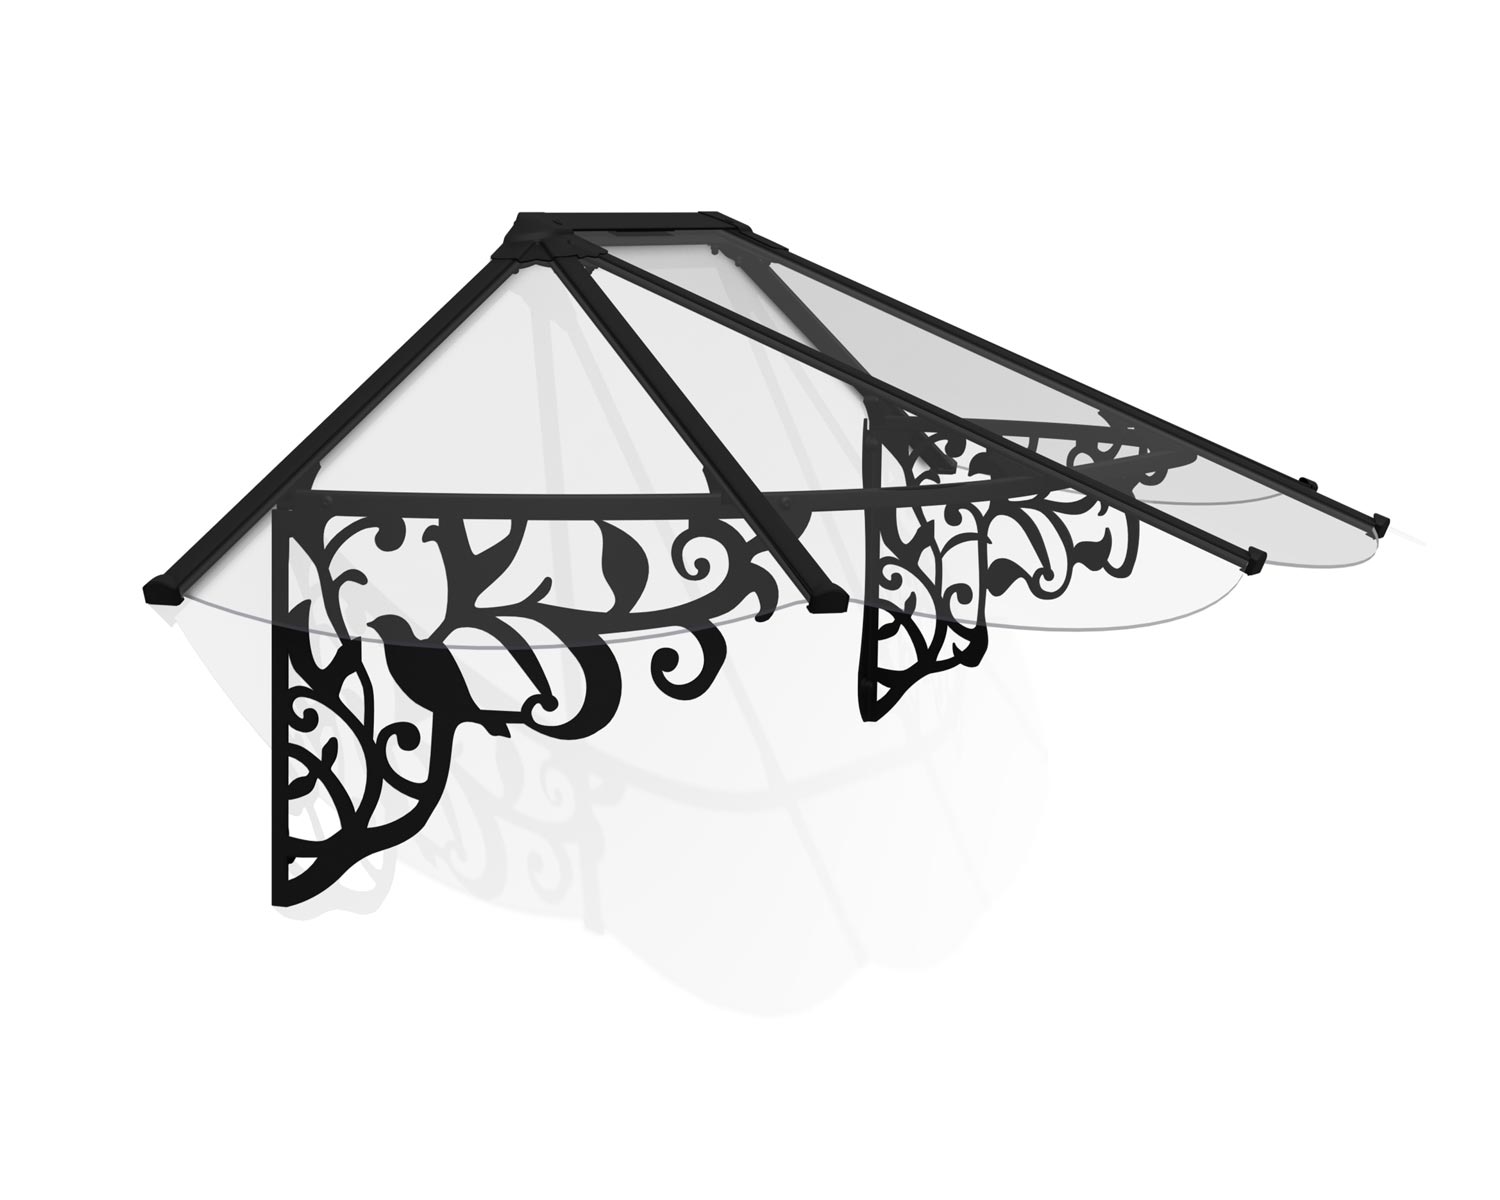 Door Awning Lily 3 ft. x 7 ft. Black Structure & Clear Glazing